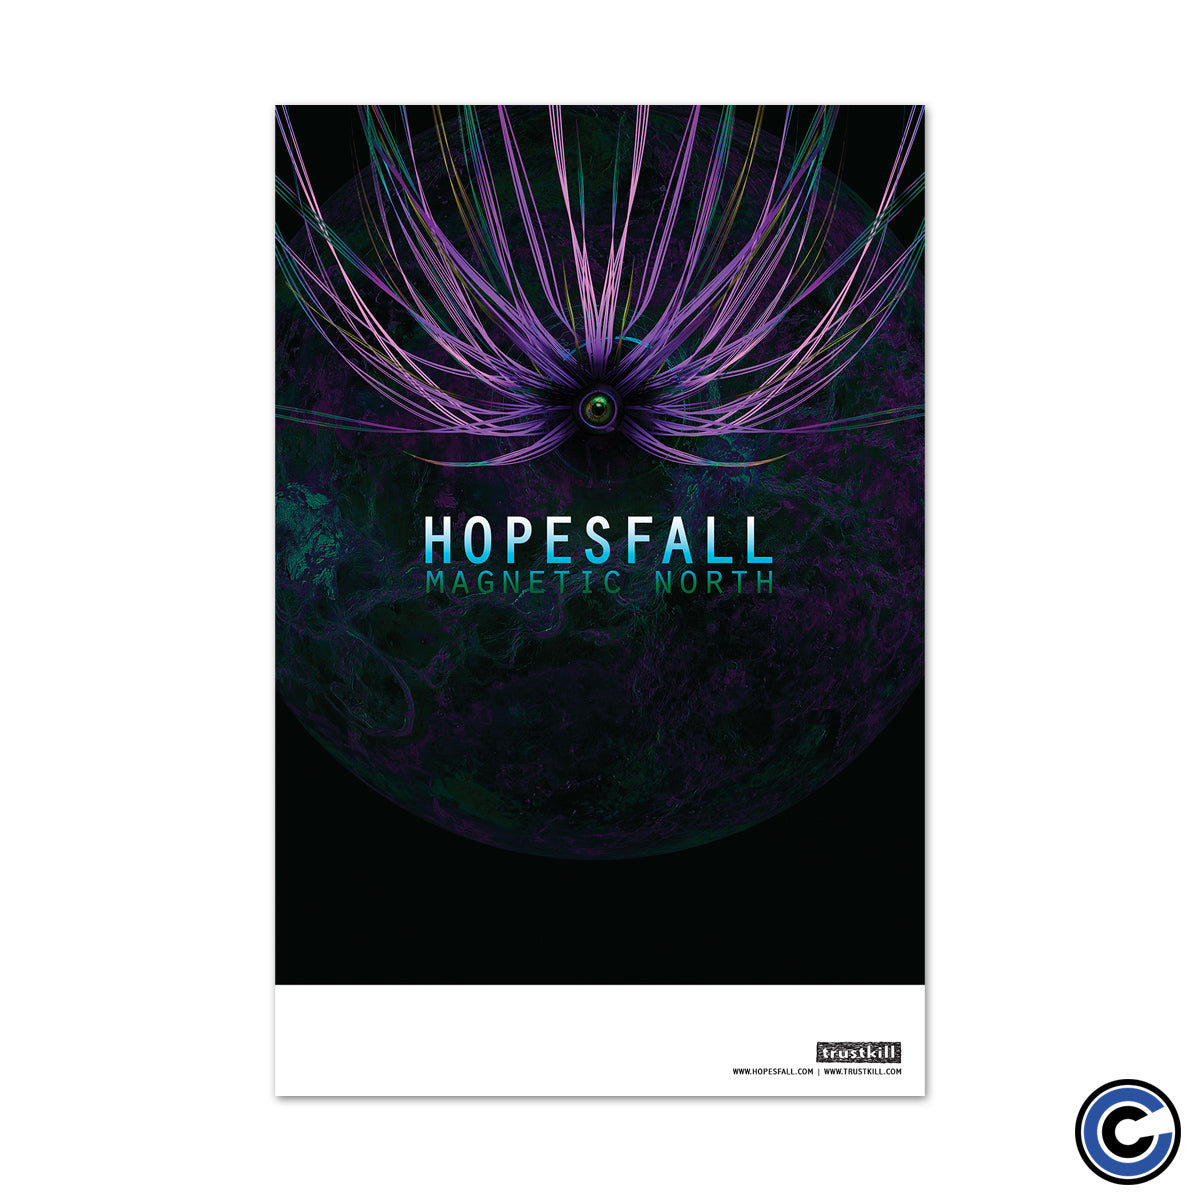 Hopesfall "Magnetic North" Poster